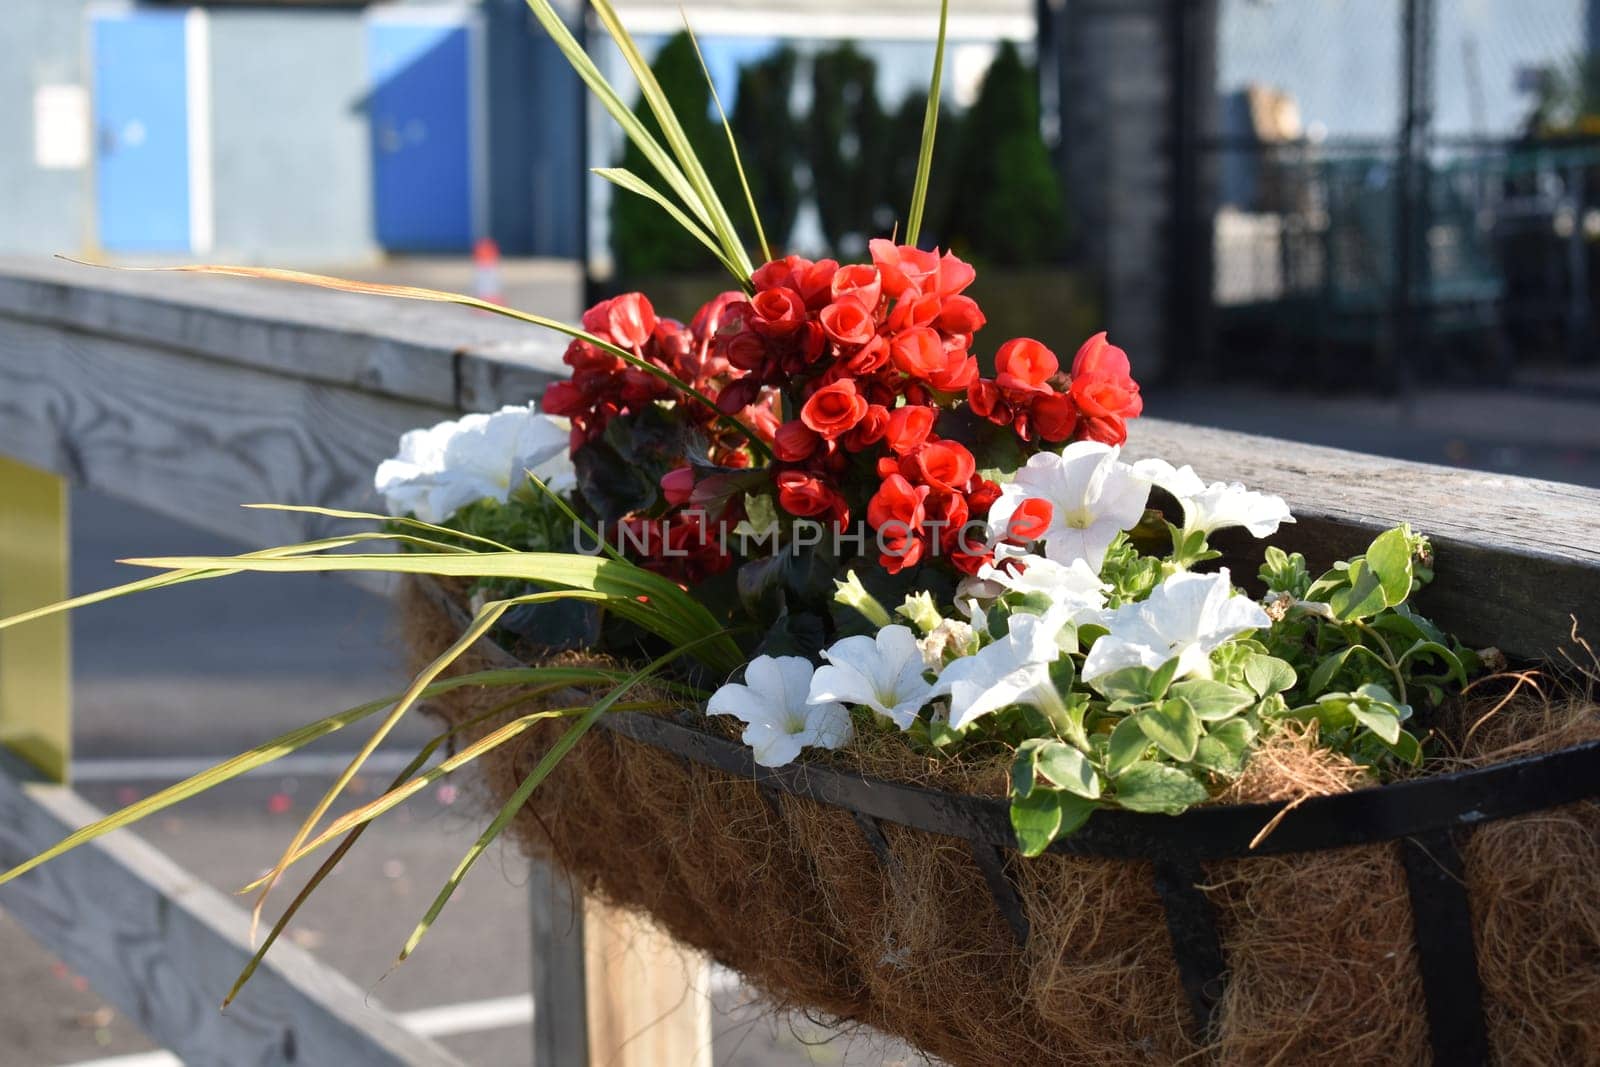 Hanging Flower Basket Planter on Fence in New York City. High quality photo